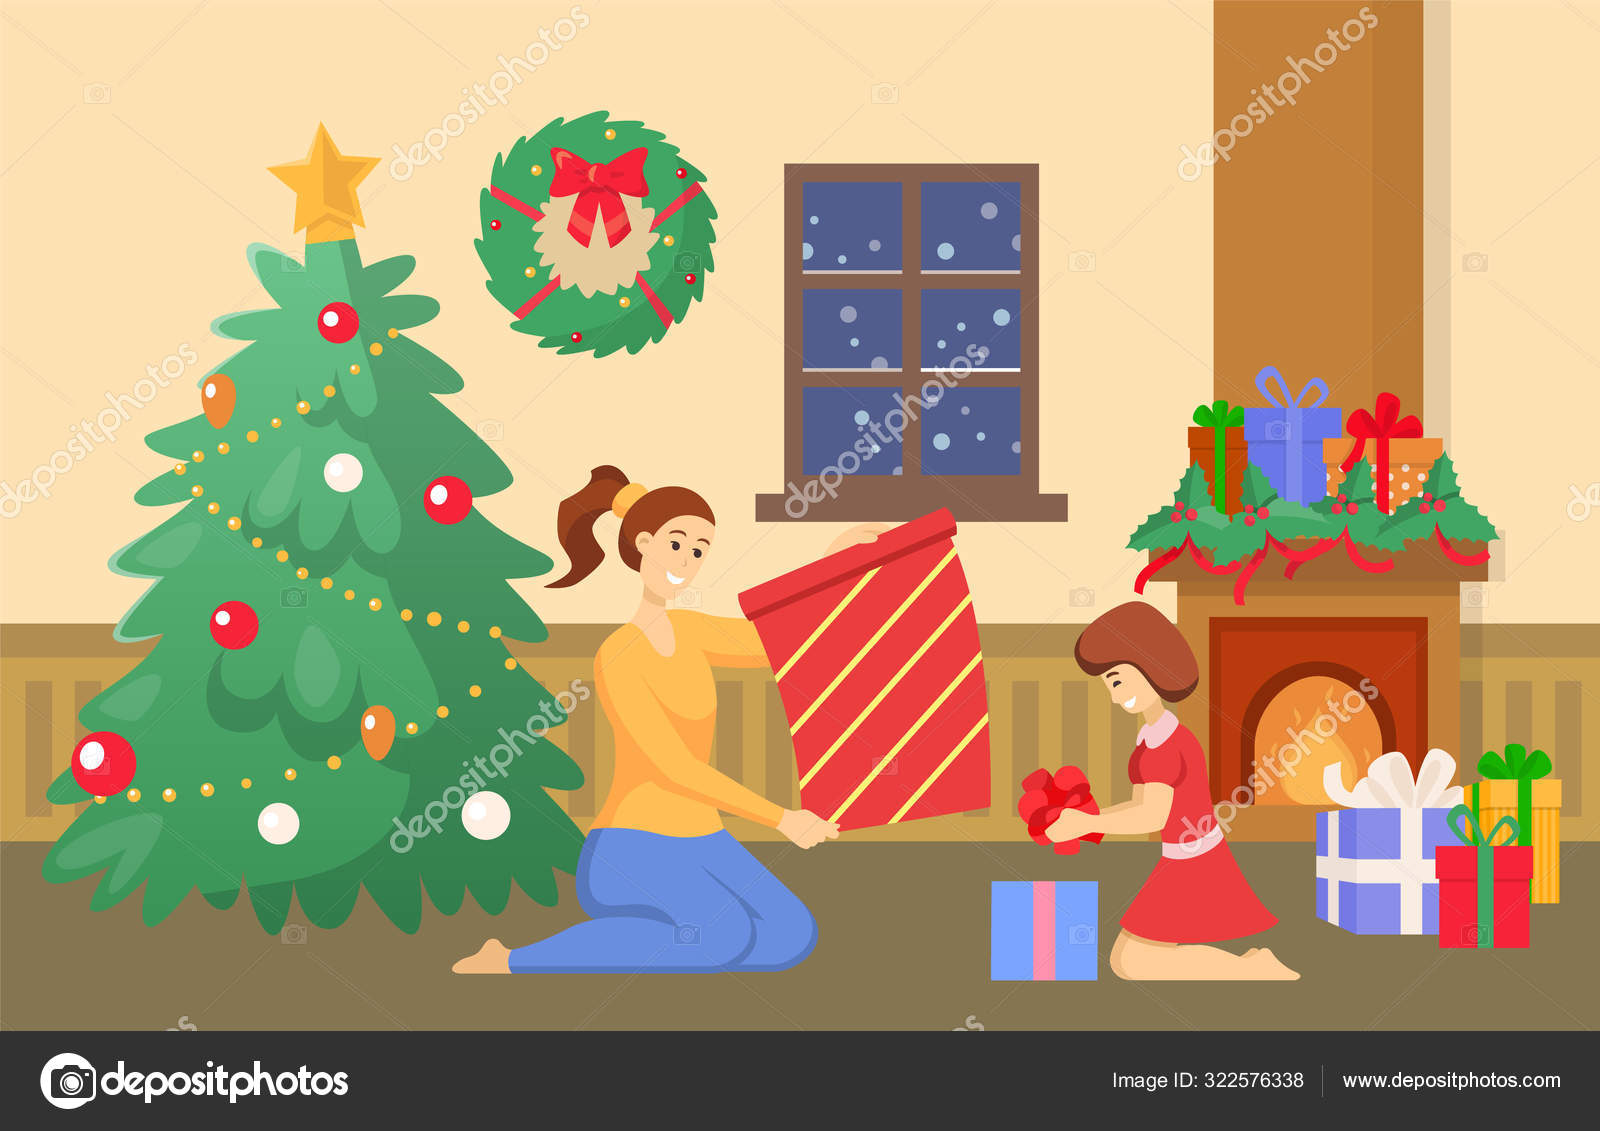 Christmas Celebration Family In Room With Christmas Tree, Father Son, Son,  Happy Home PNG Transparent Image and Clipart for Free Download